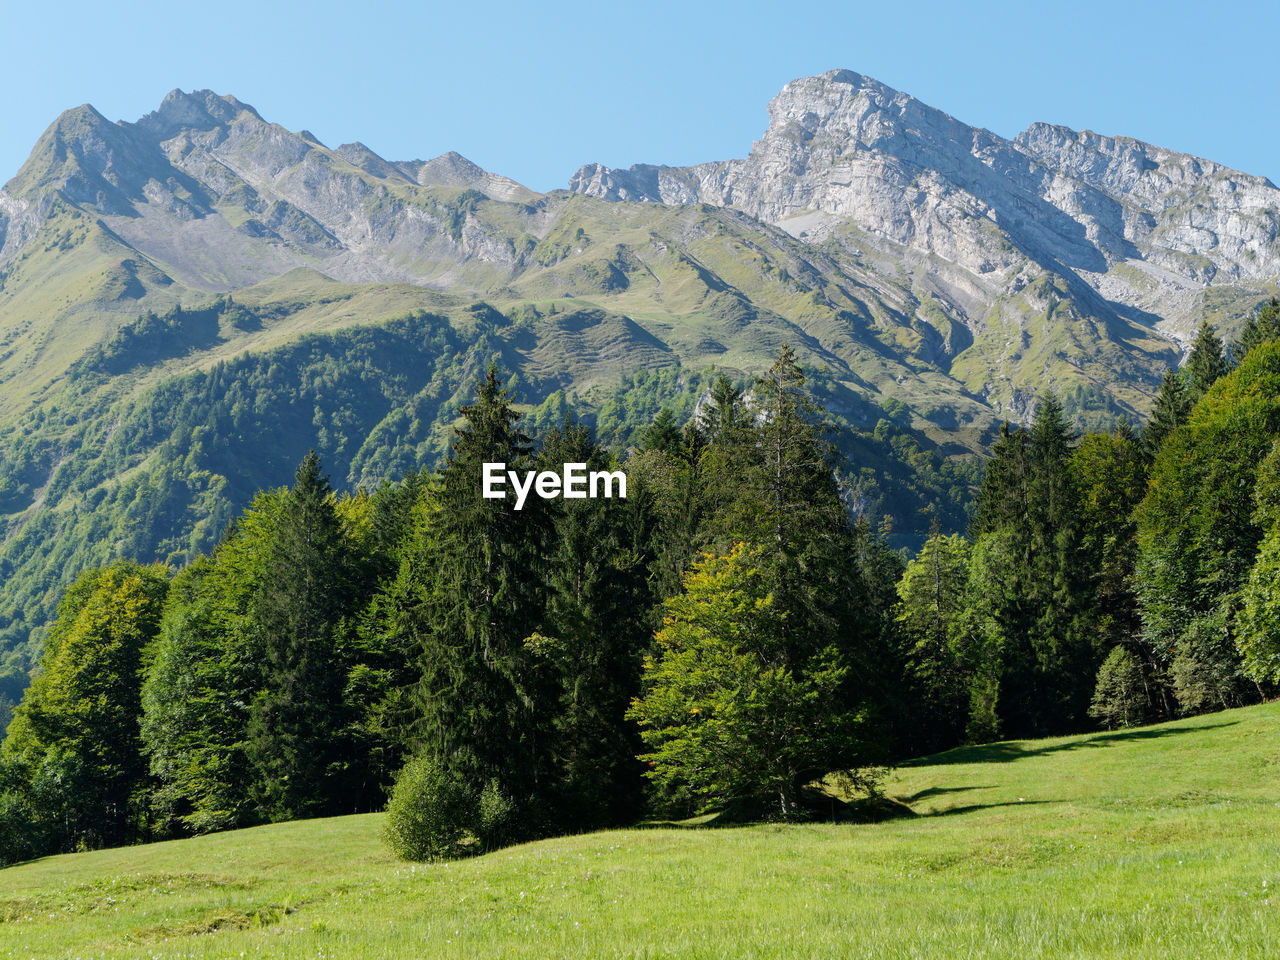 panoramic view of trees and mountains against sky